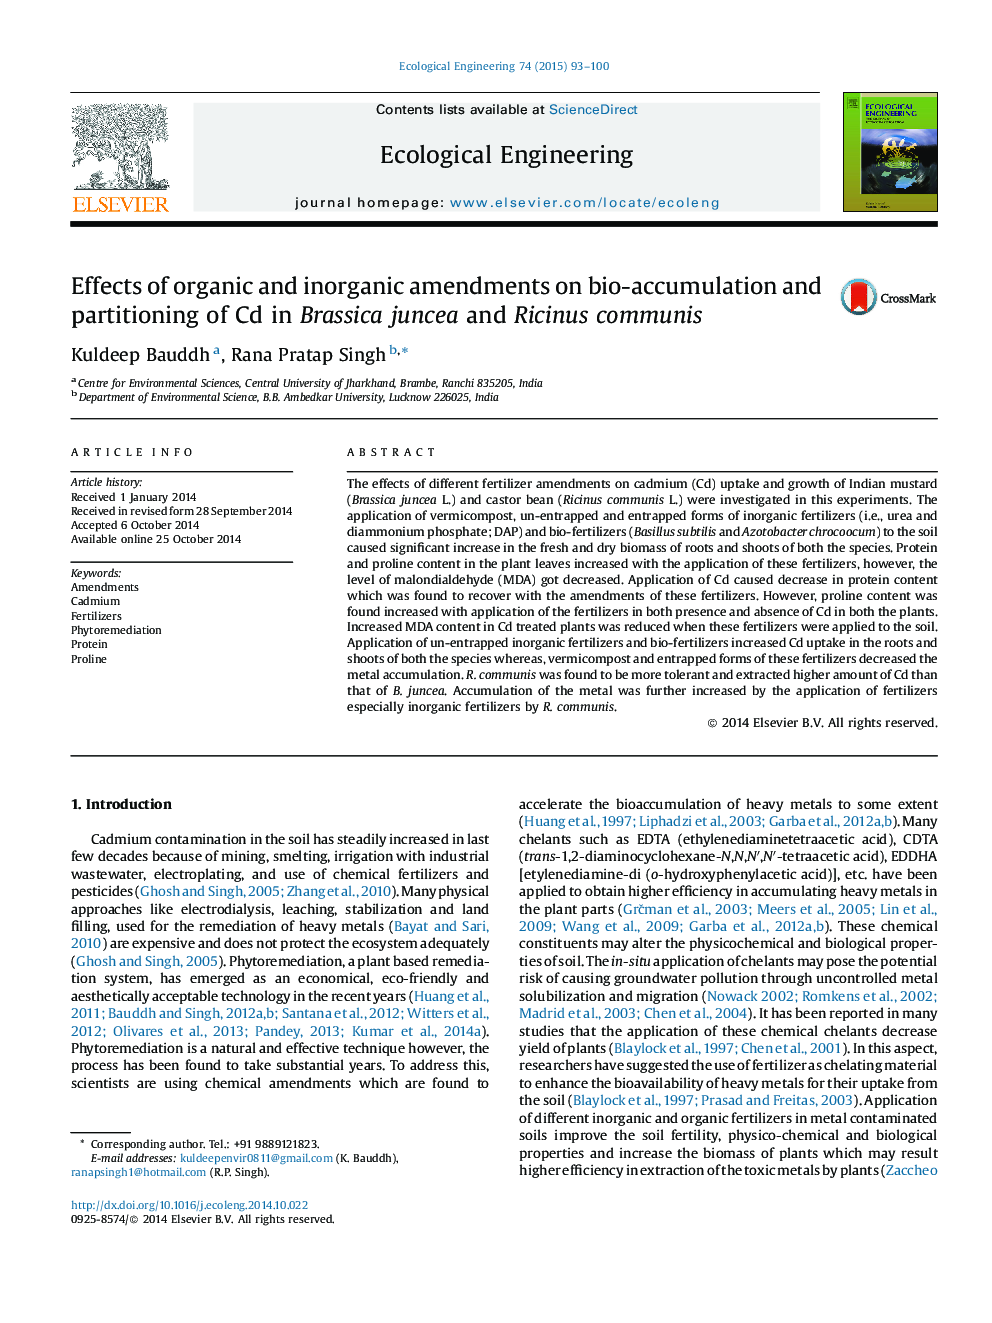 Effects of organic and inorganic amendments on bio-accumulation and partitioning of Cd in Brassica juncea and Ricinus communis